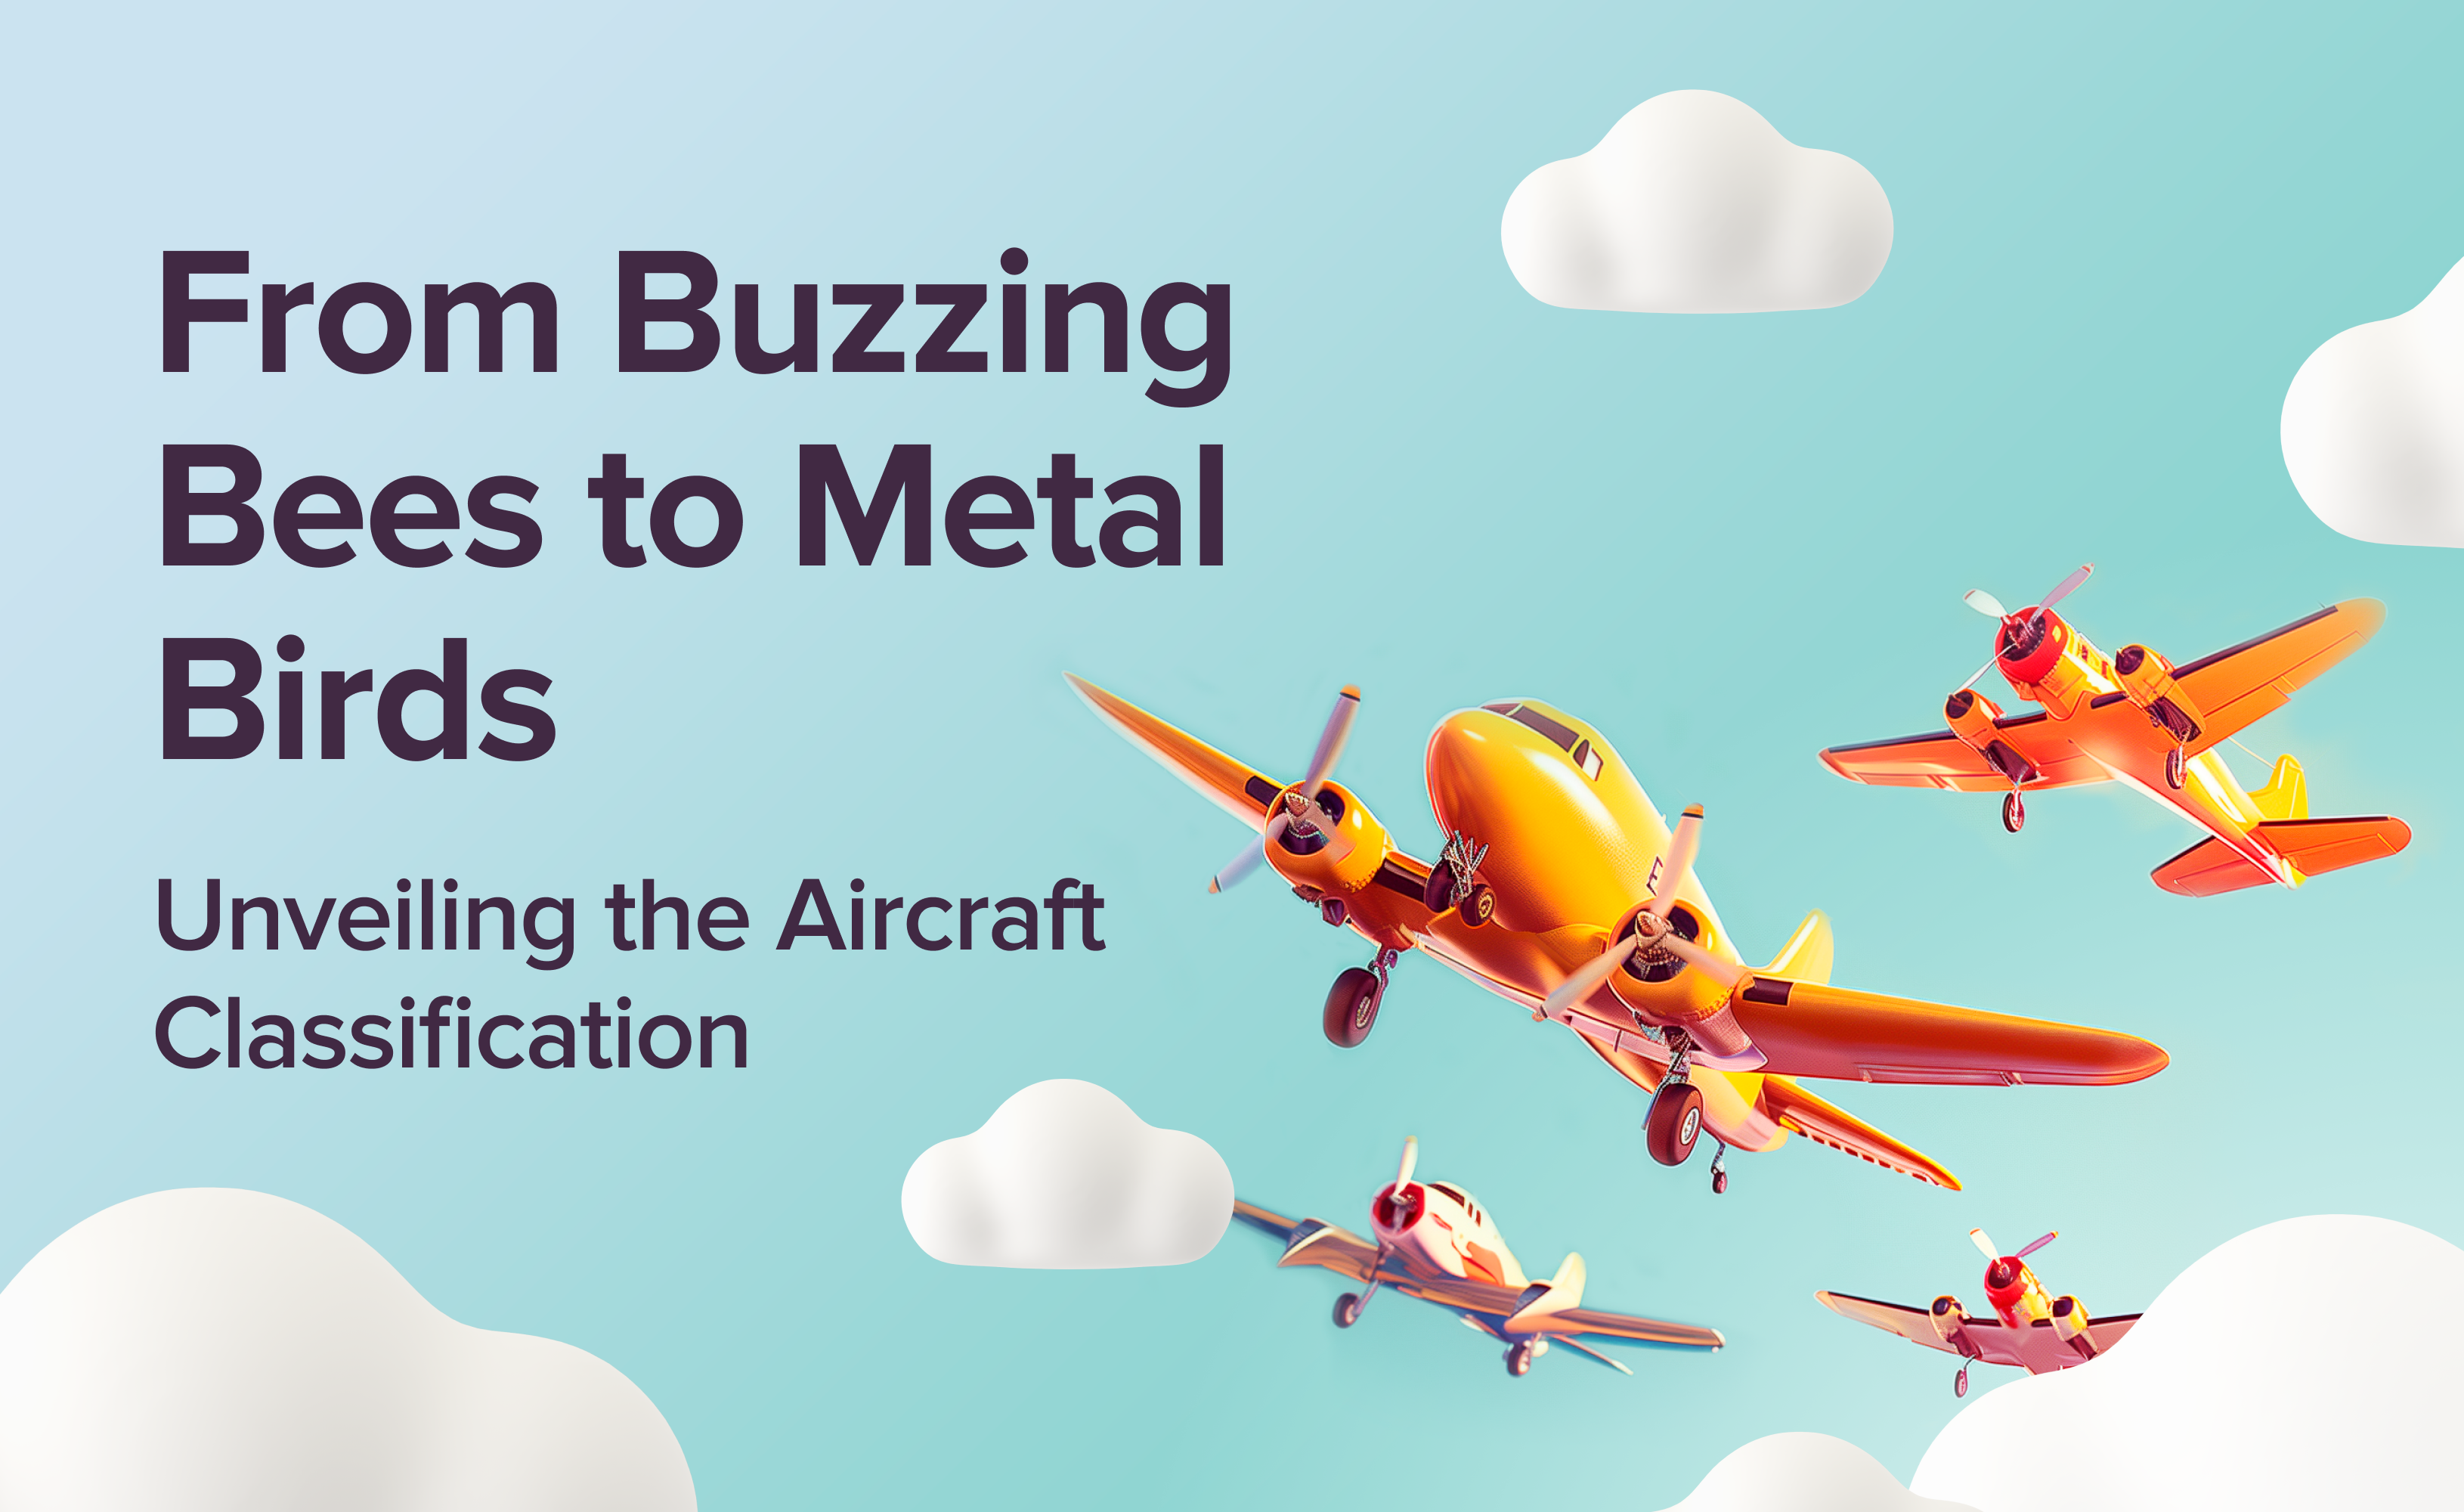 From Buzzing Bees to Metal Birds. Unveiling the Aircraft Classification